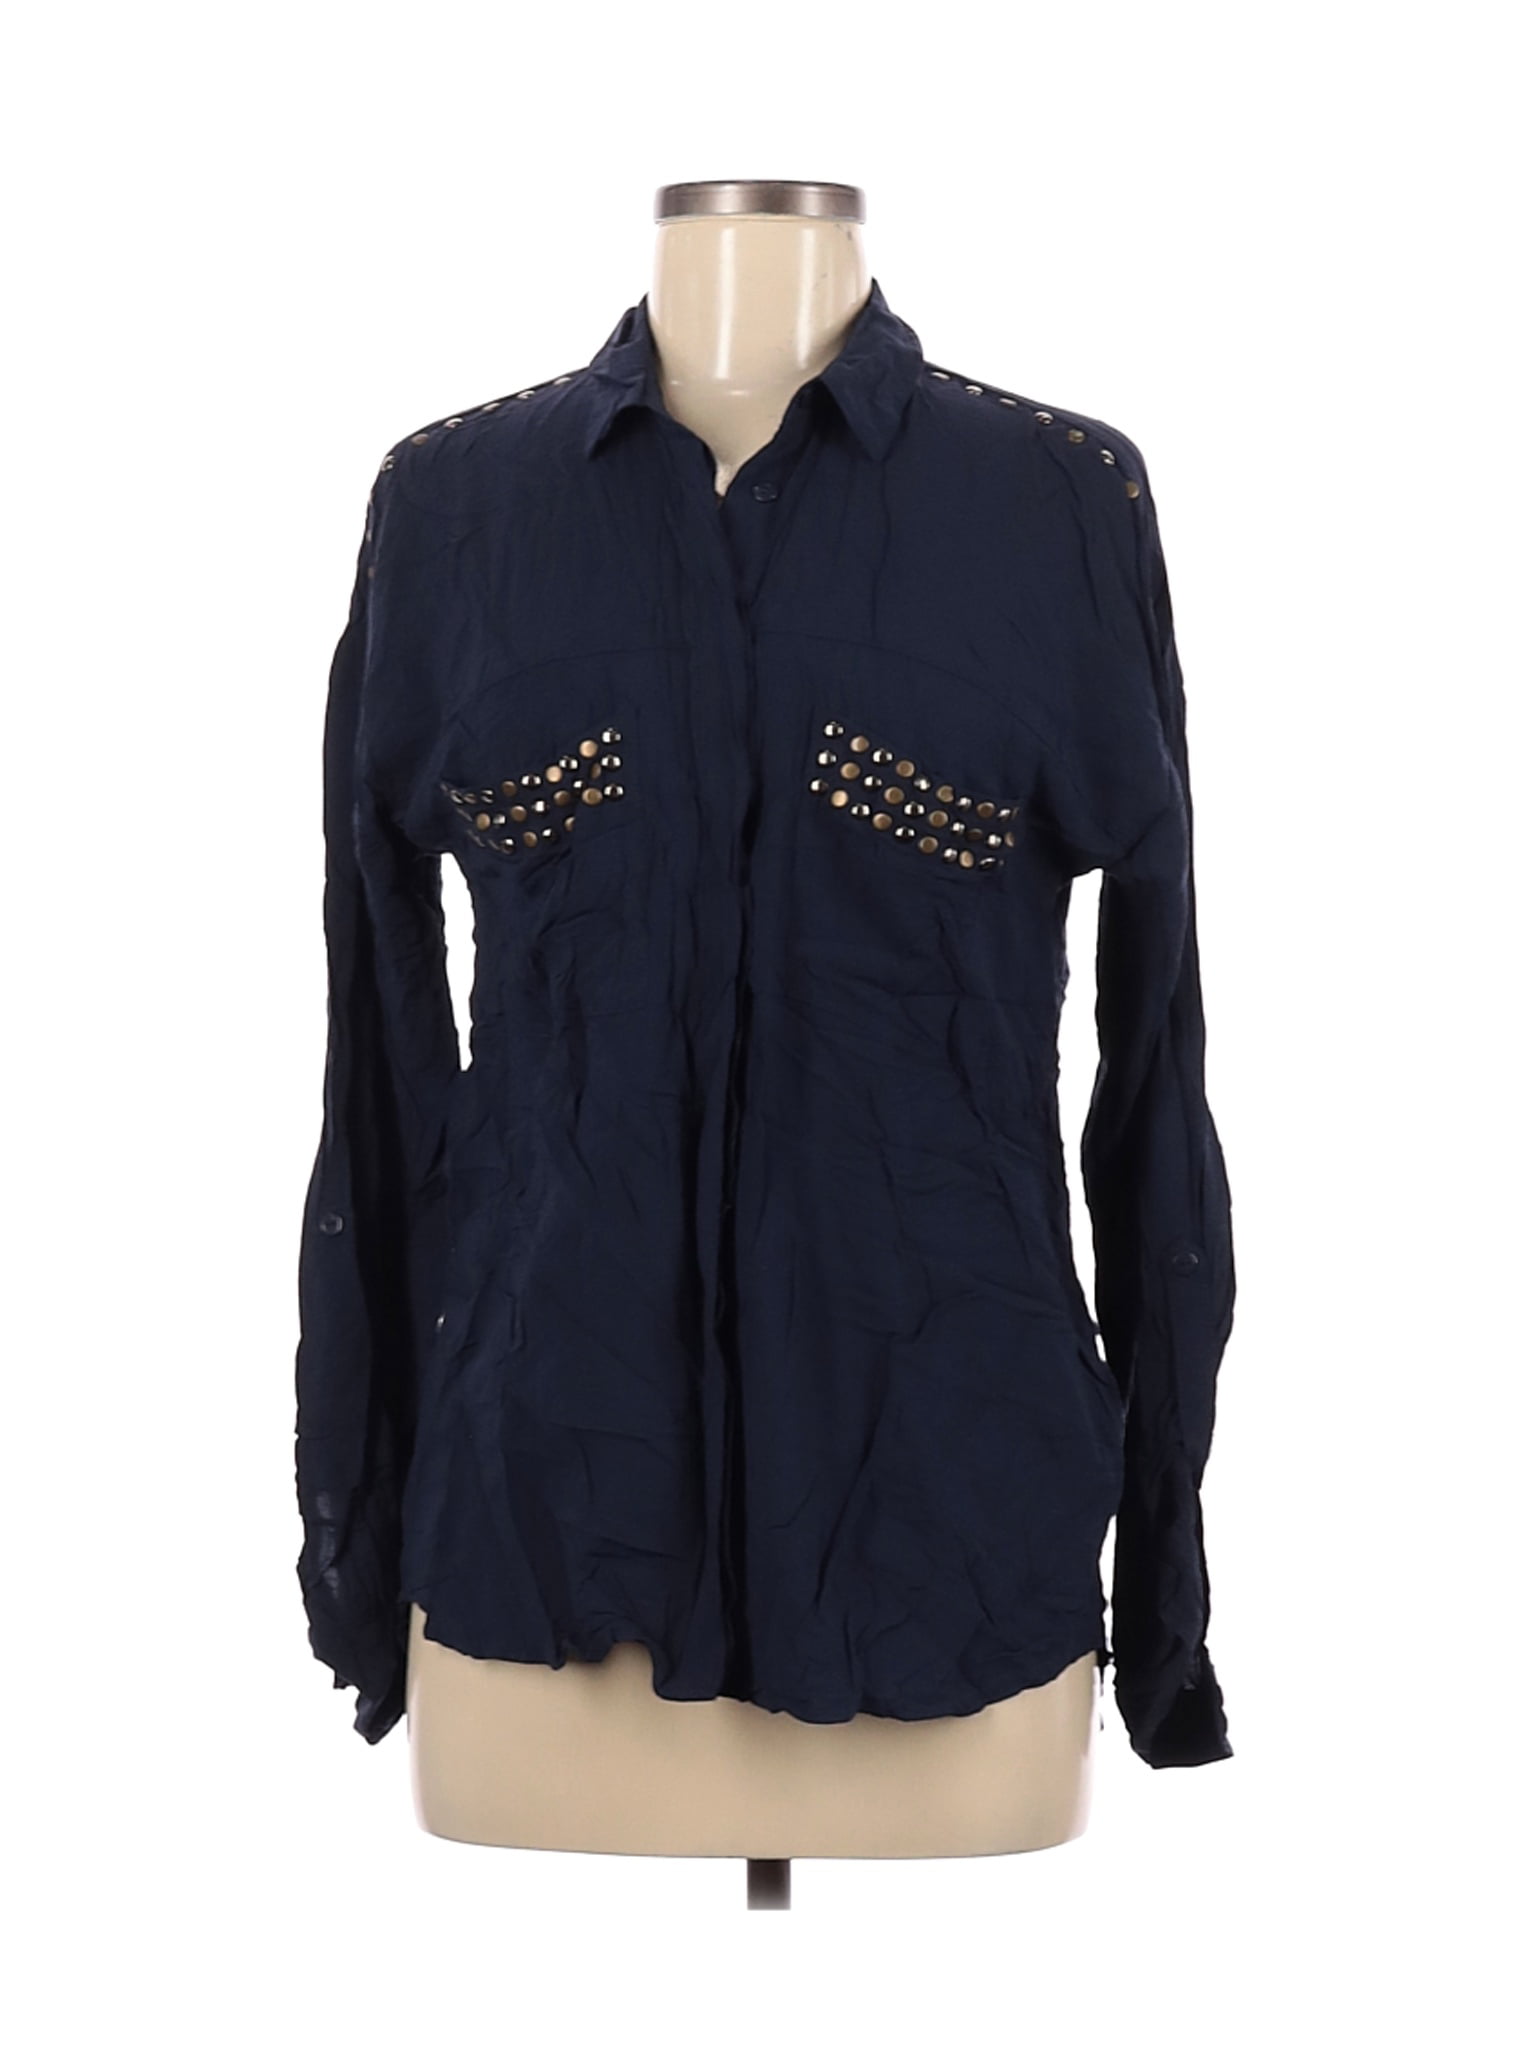 glas Malawi Kort levetid Gina Tricot - Pre-Owned Gina Tricot Women's Size 40 Long Sleeve Button-Down  Shirt - Walmart.com - Walmart.com